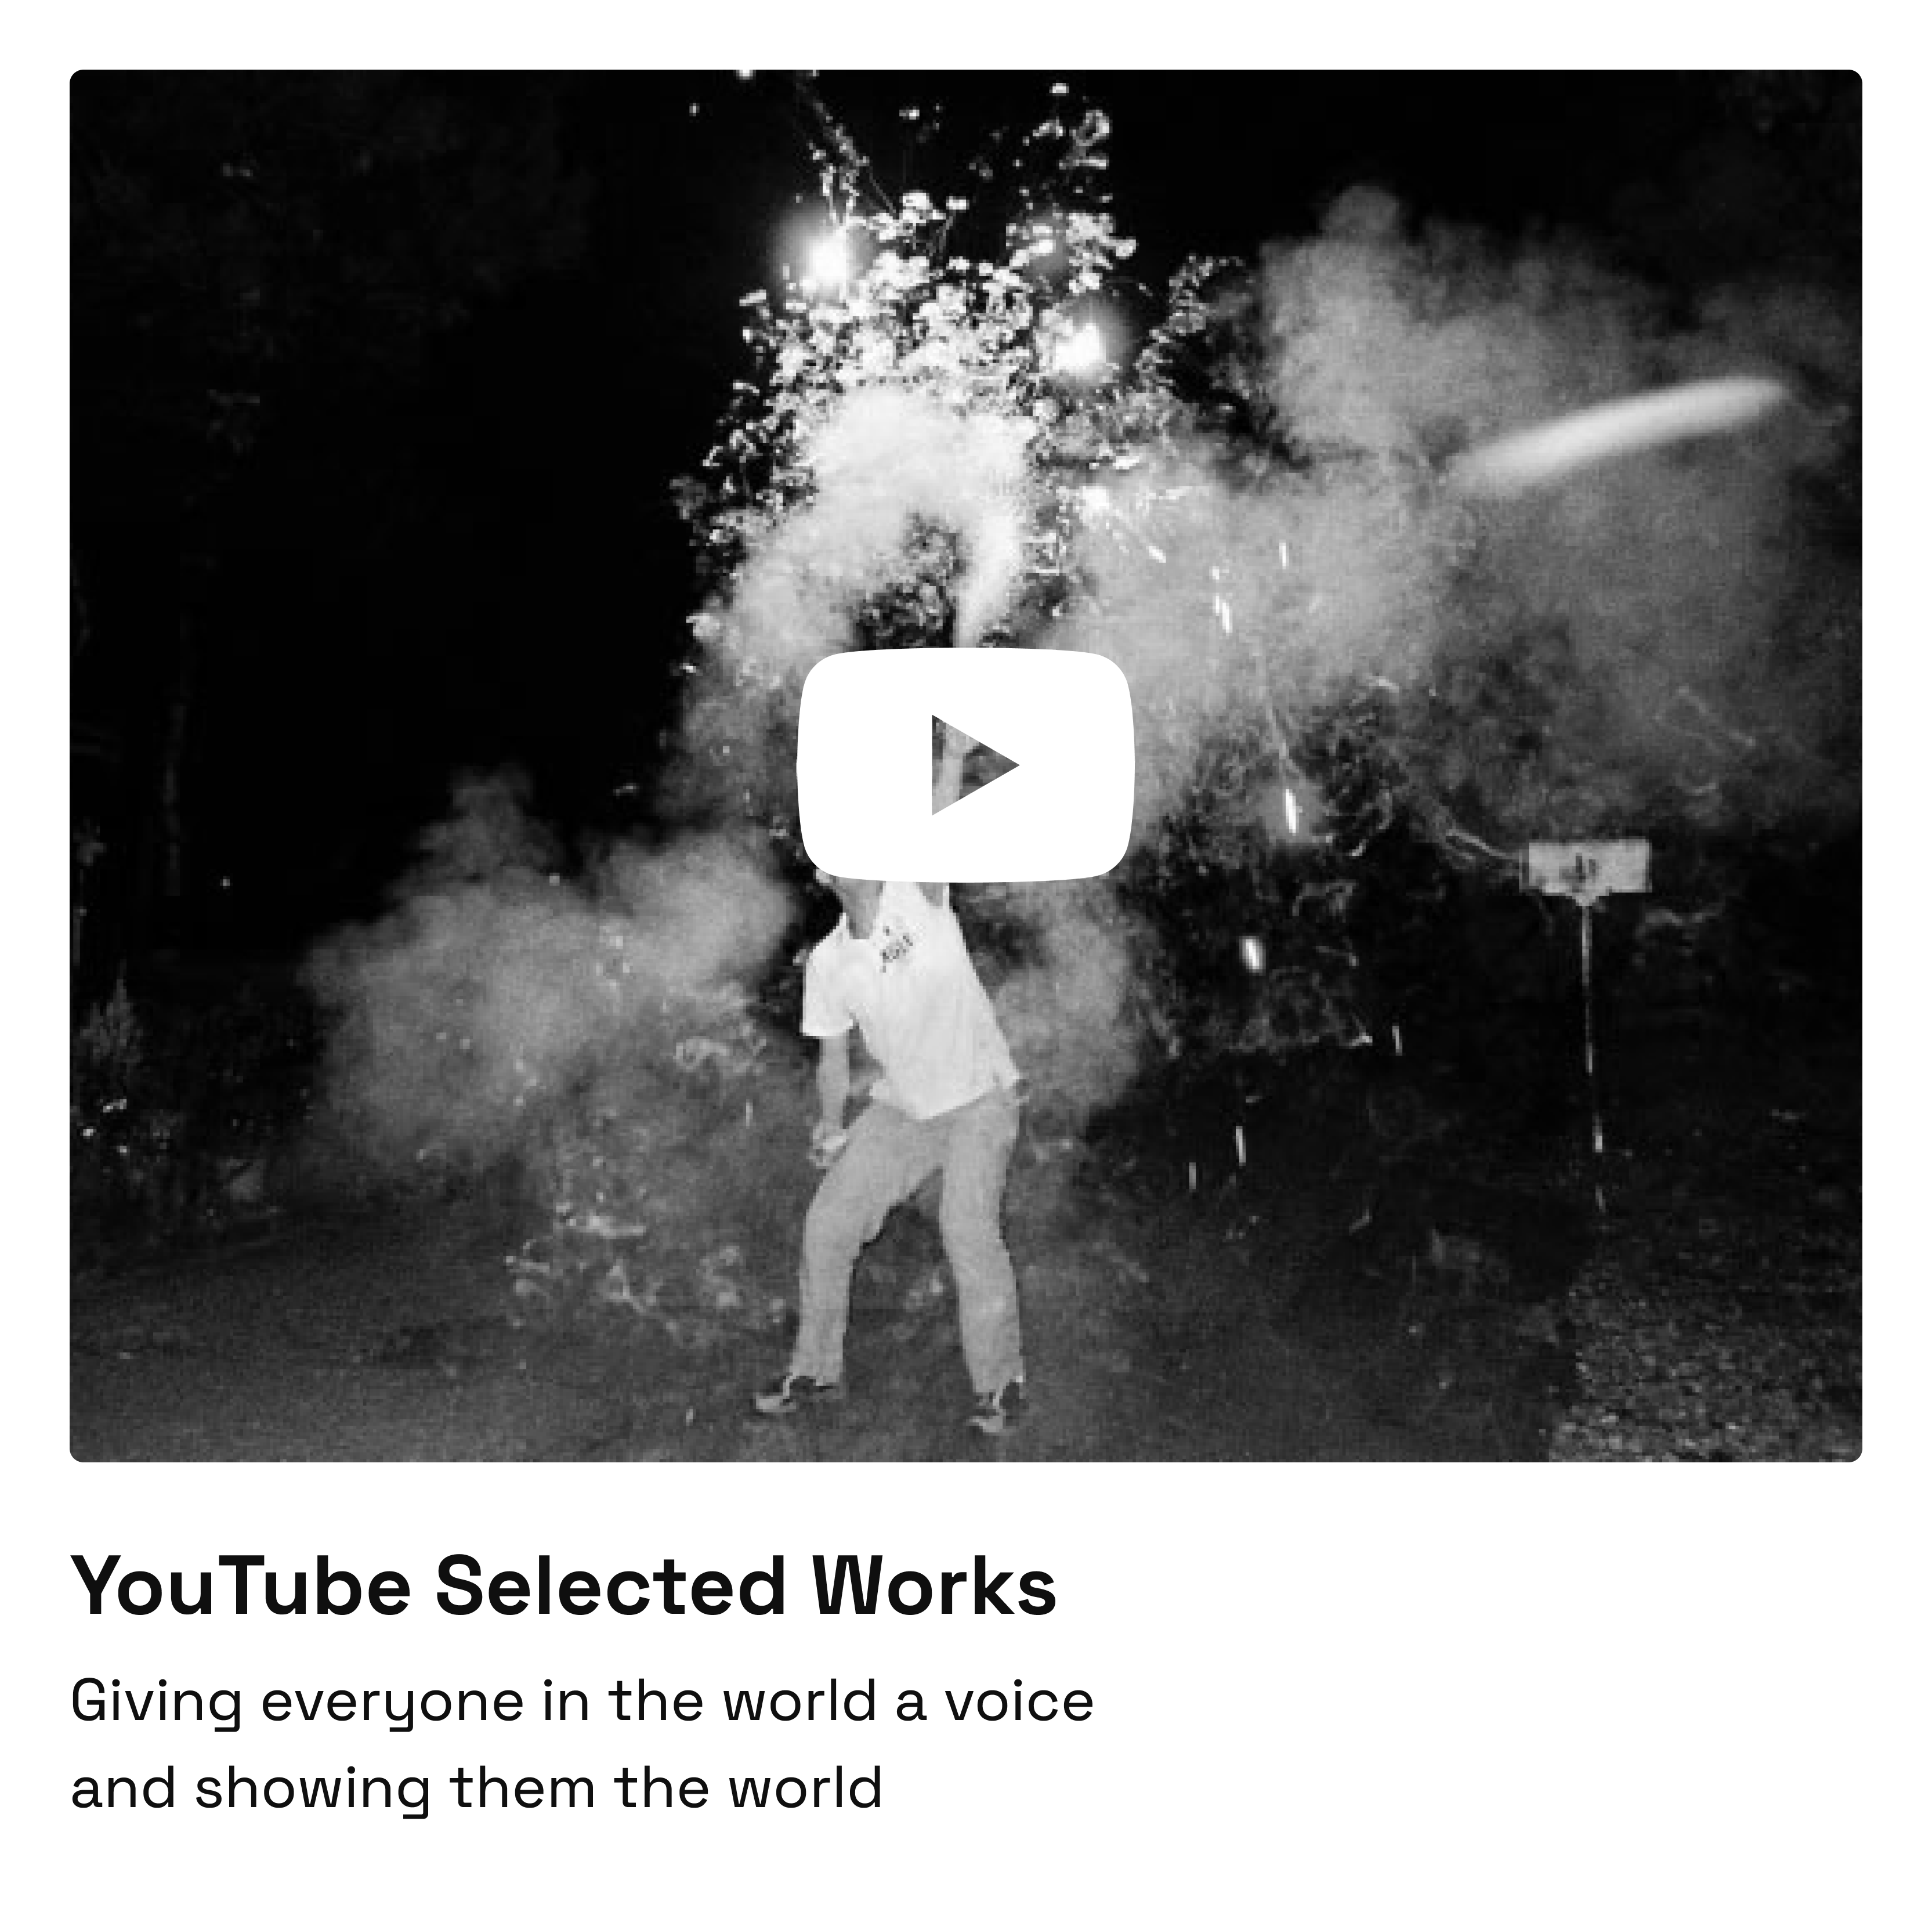 YouTube Selected Works